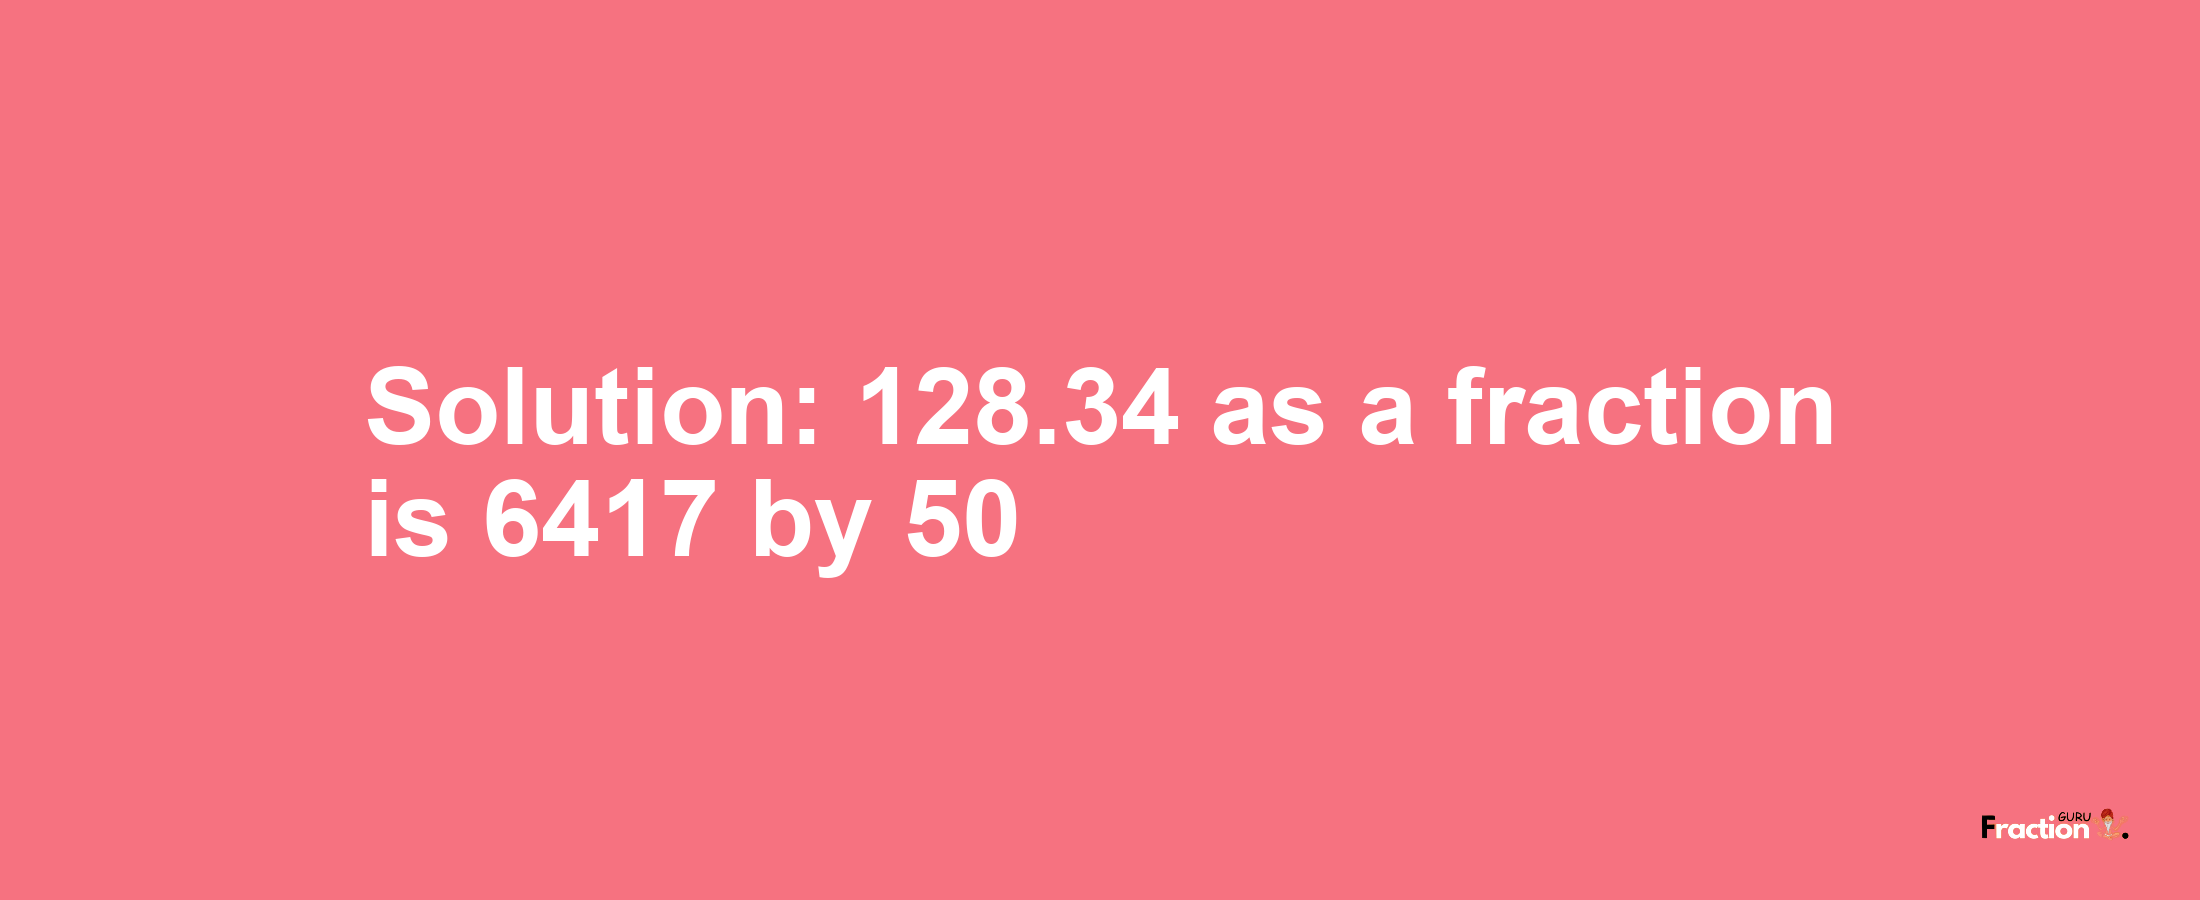 Solution:128.34 as a fraction is 6417/50